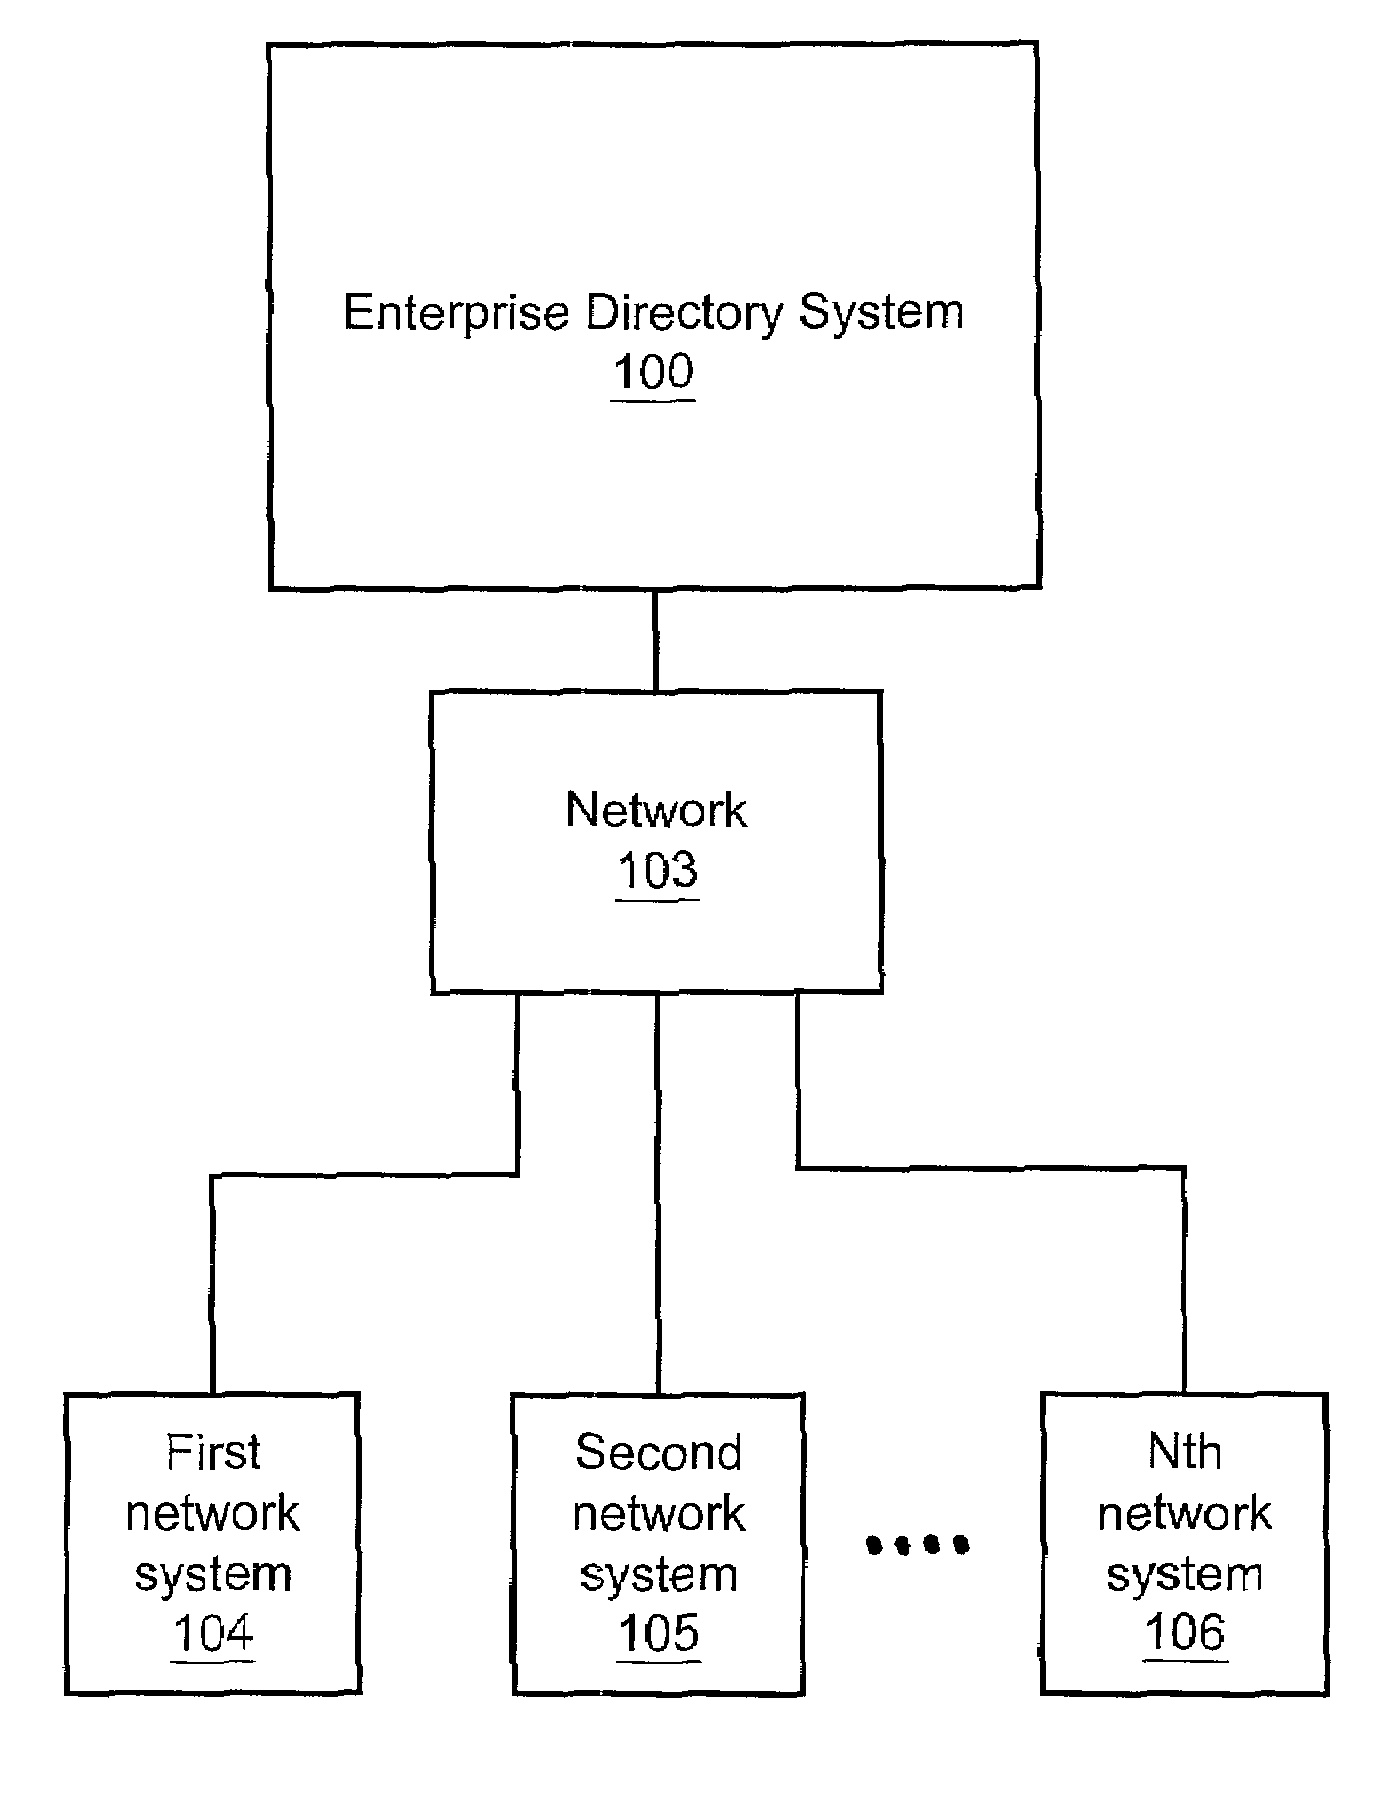 System and method for managing security access for users to network systems